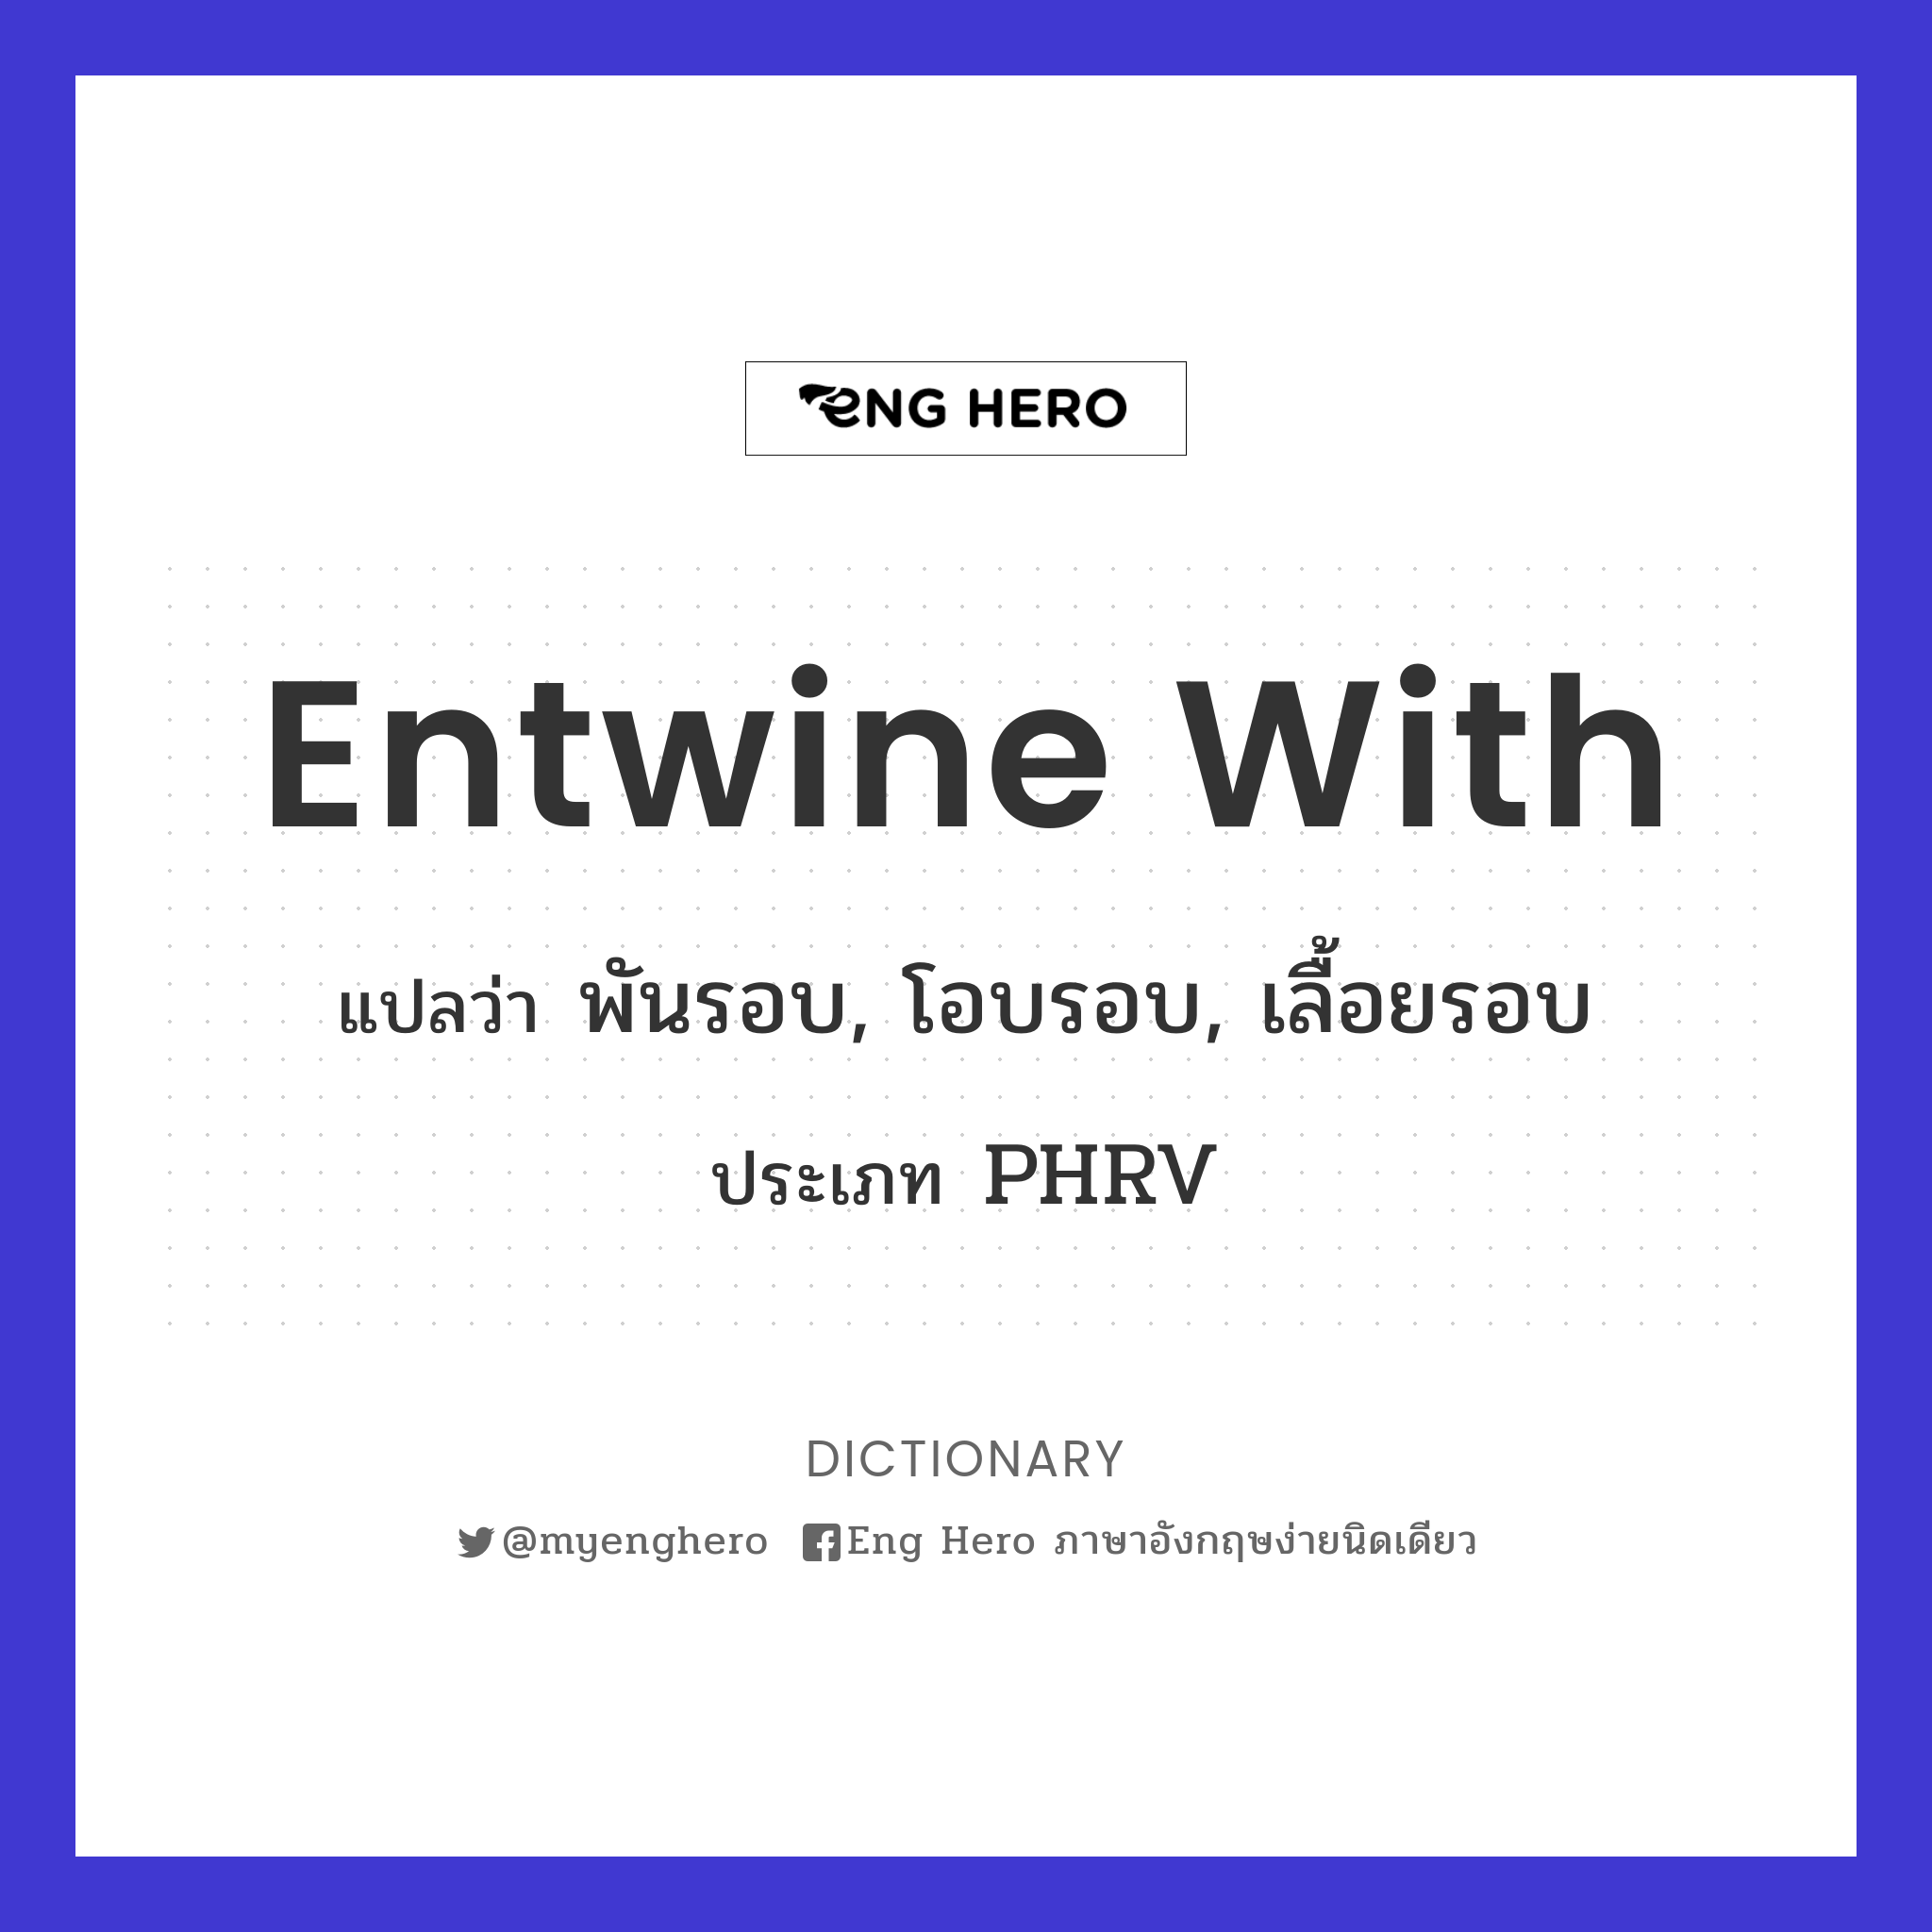 entwine with